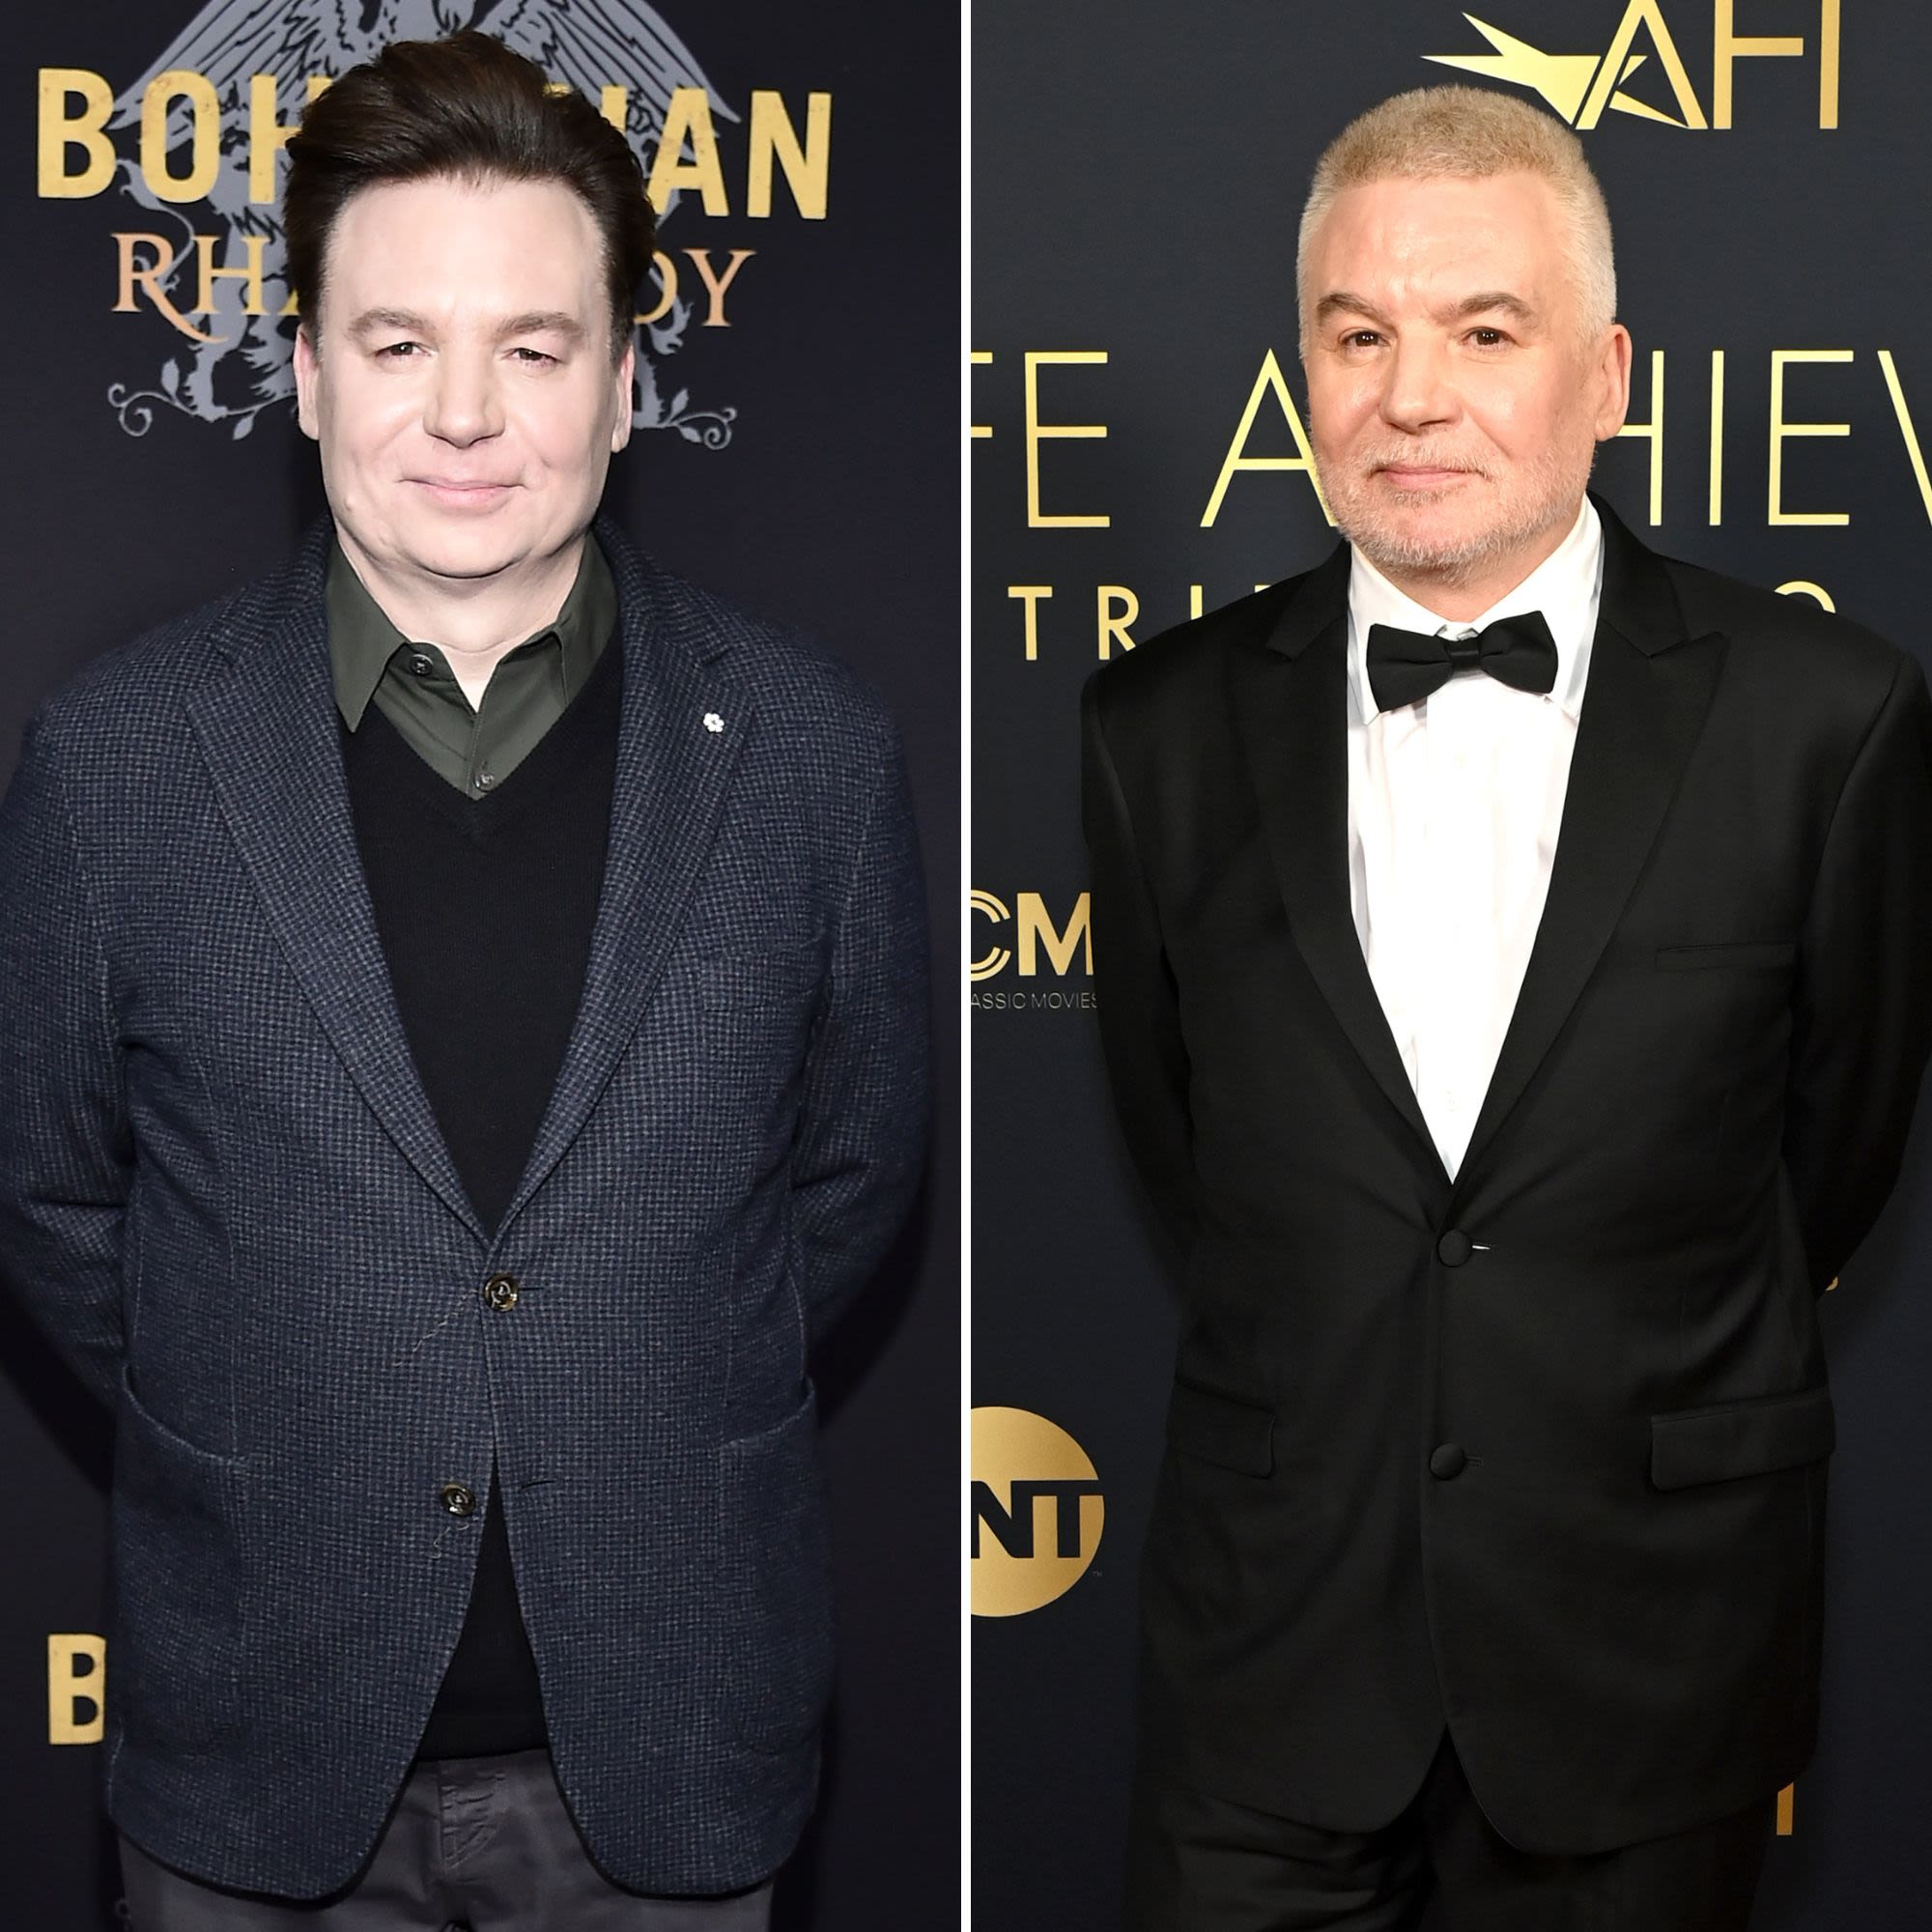 Mike Myers Looks Unrecognizable in Rare Red Carpet Appearance at AFI Lifetime Achievement Awards